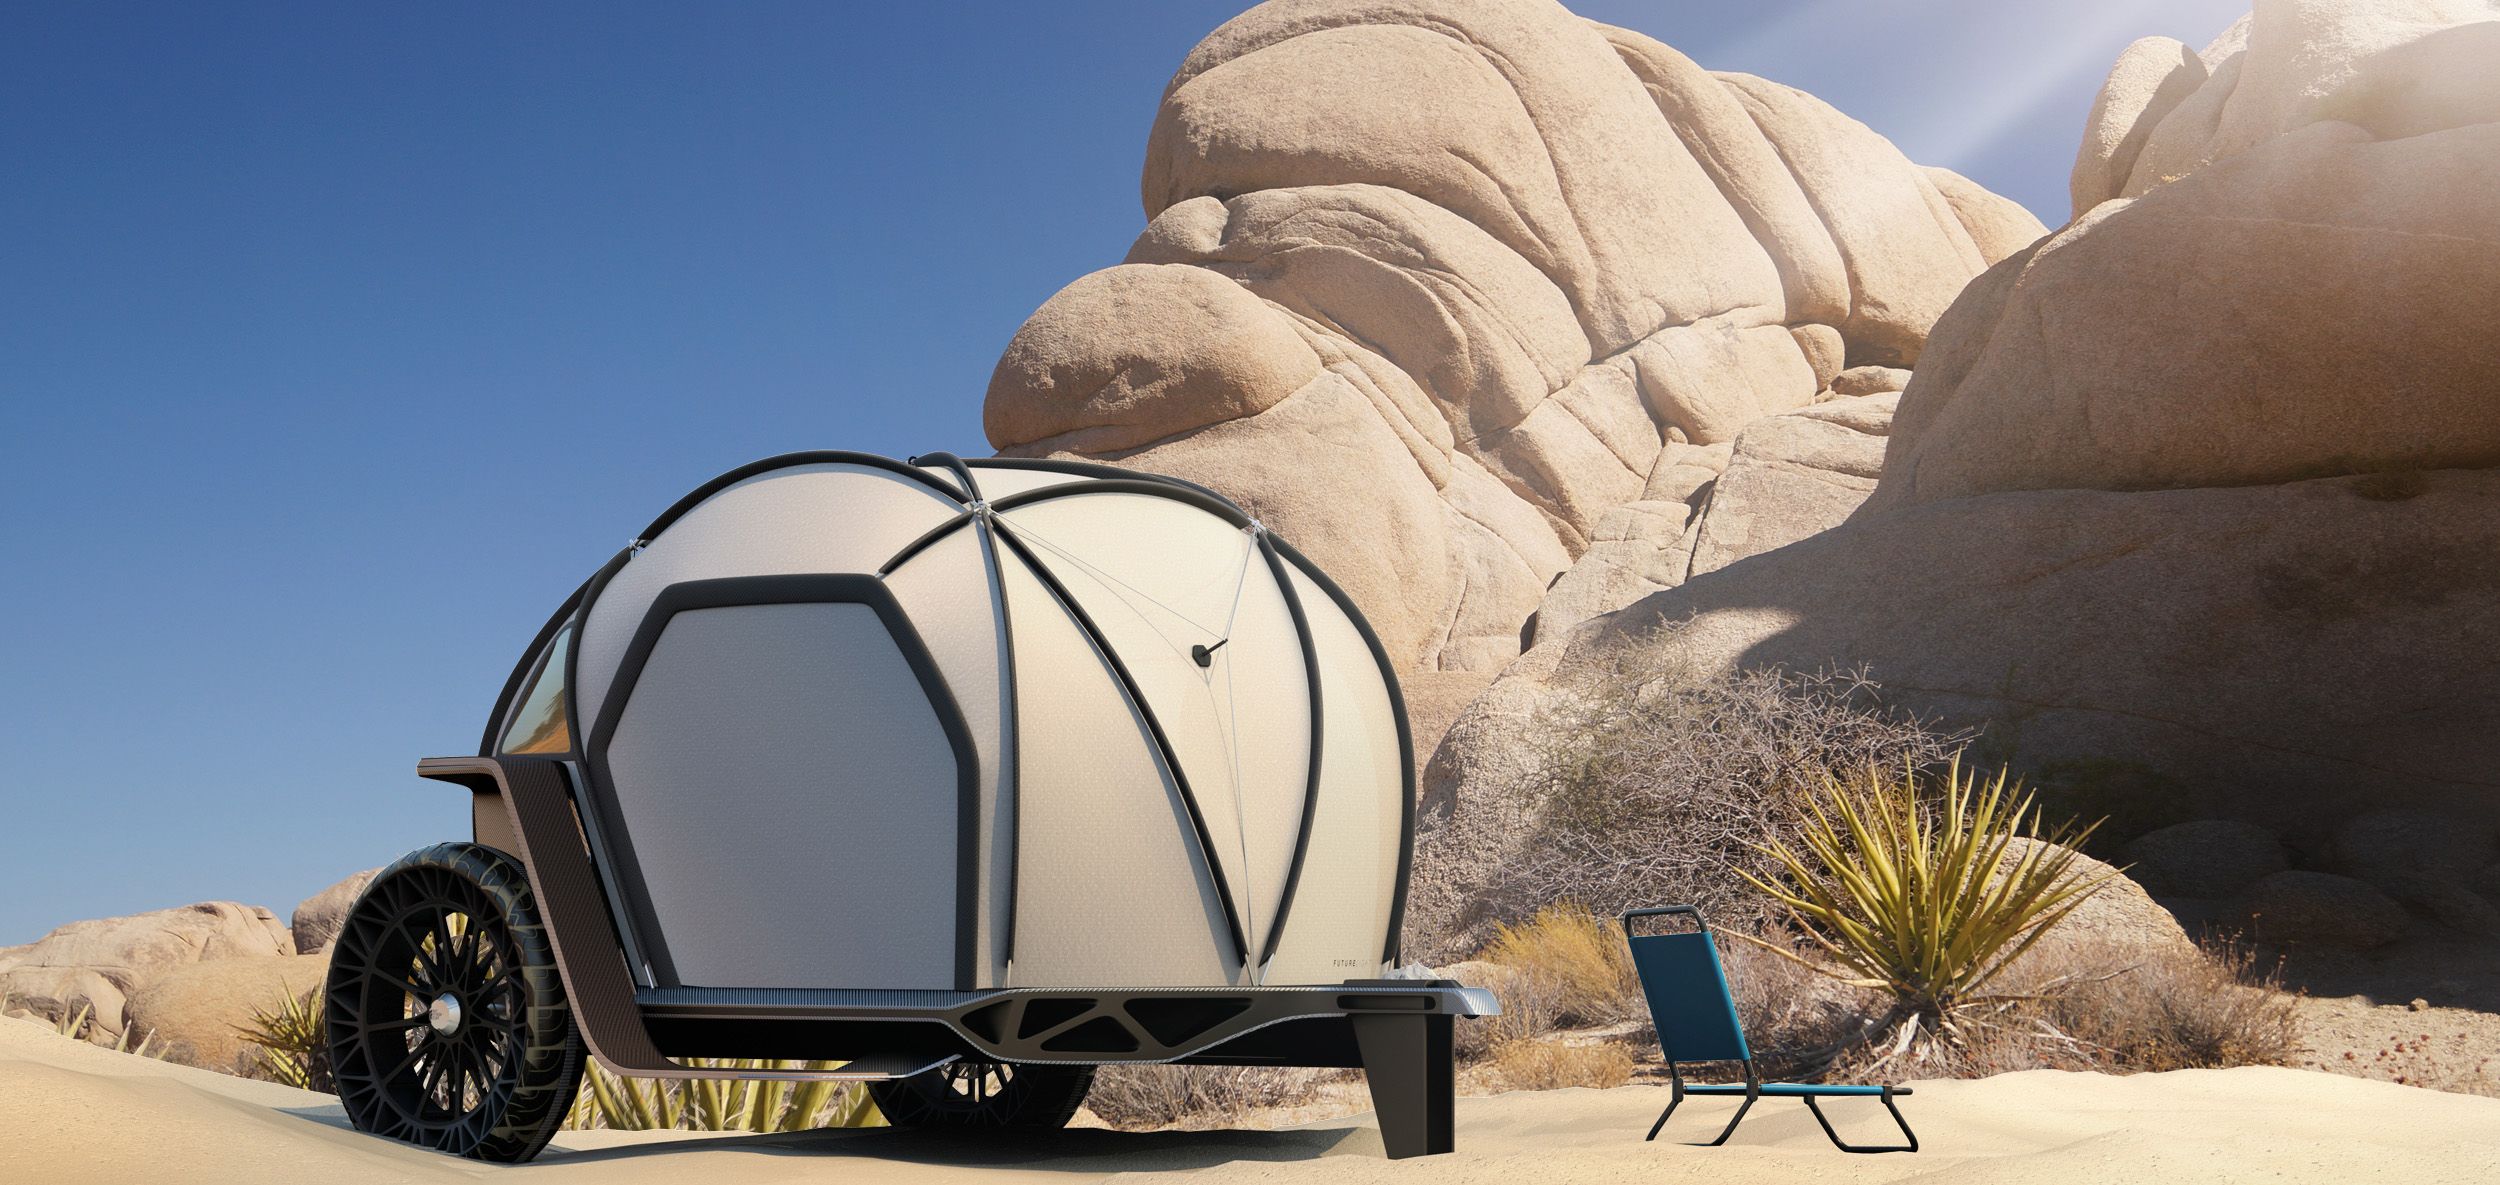 The North Face camper in Joshua Tree National Park.